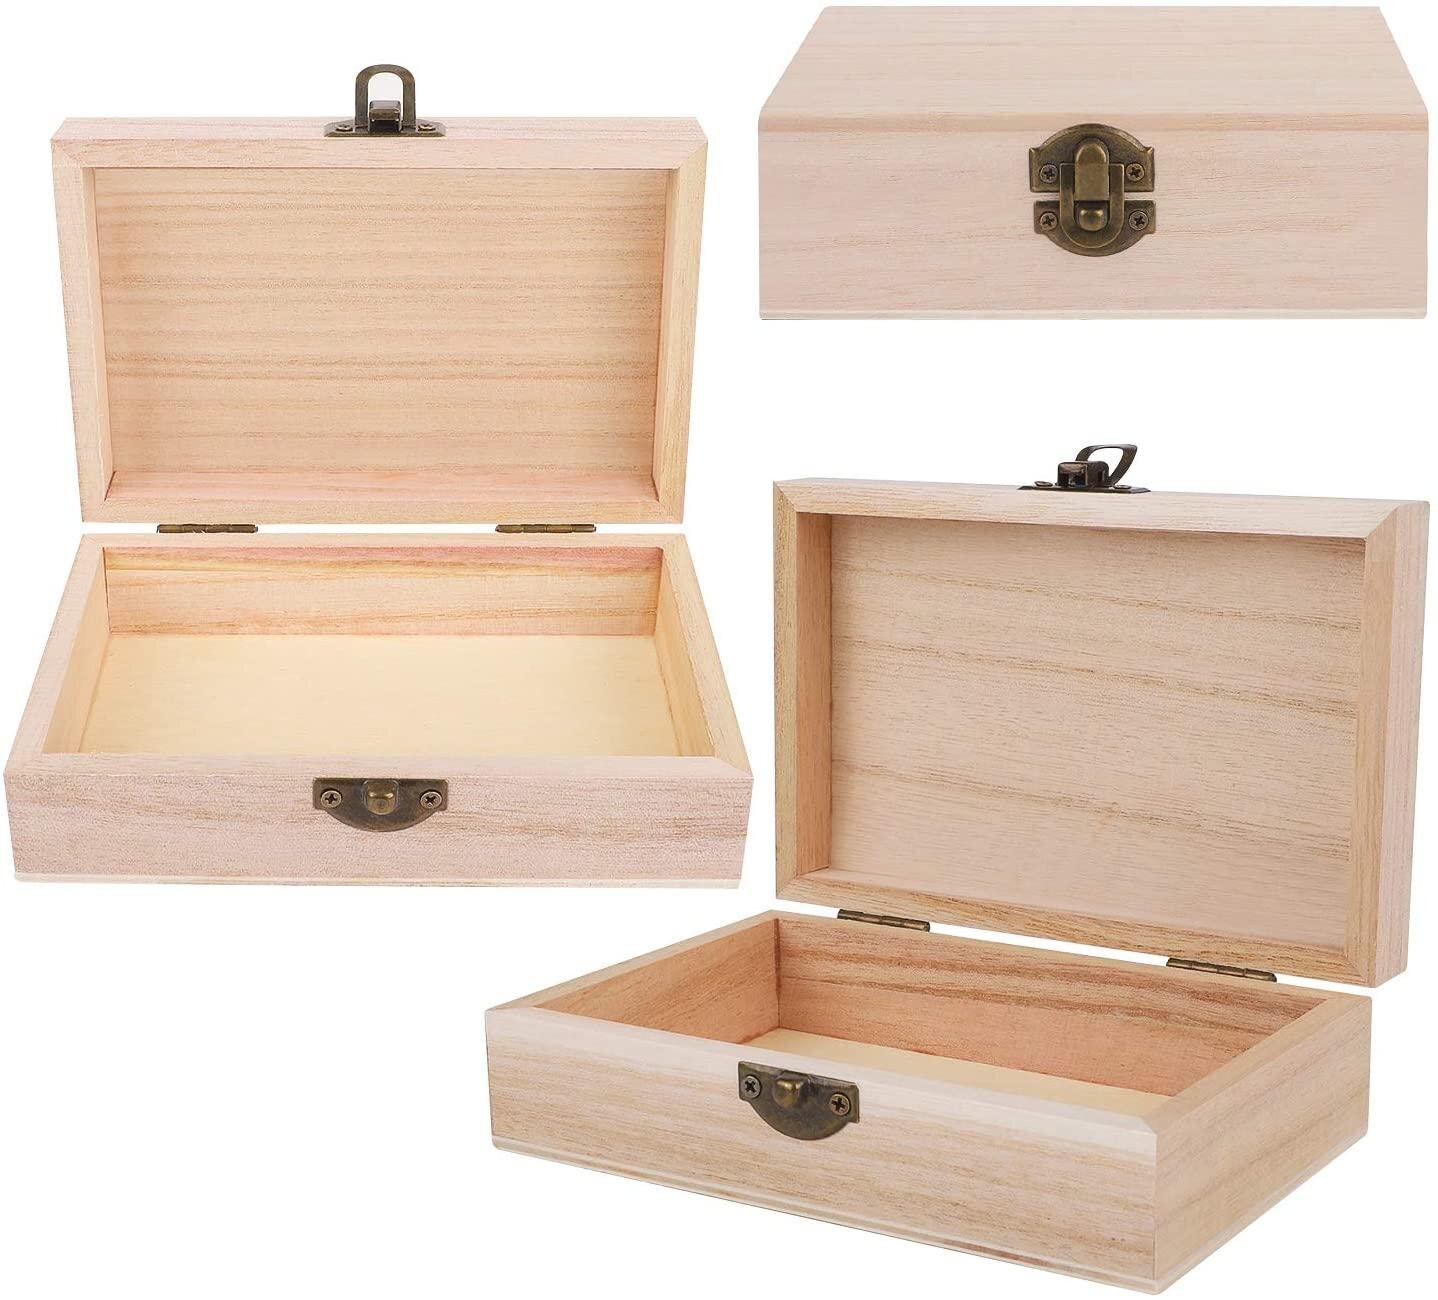 Wooden Strong Box Pine Case Organiser Lided Tool Crate Clasp Decor Red White